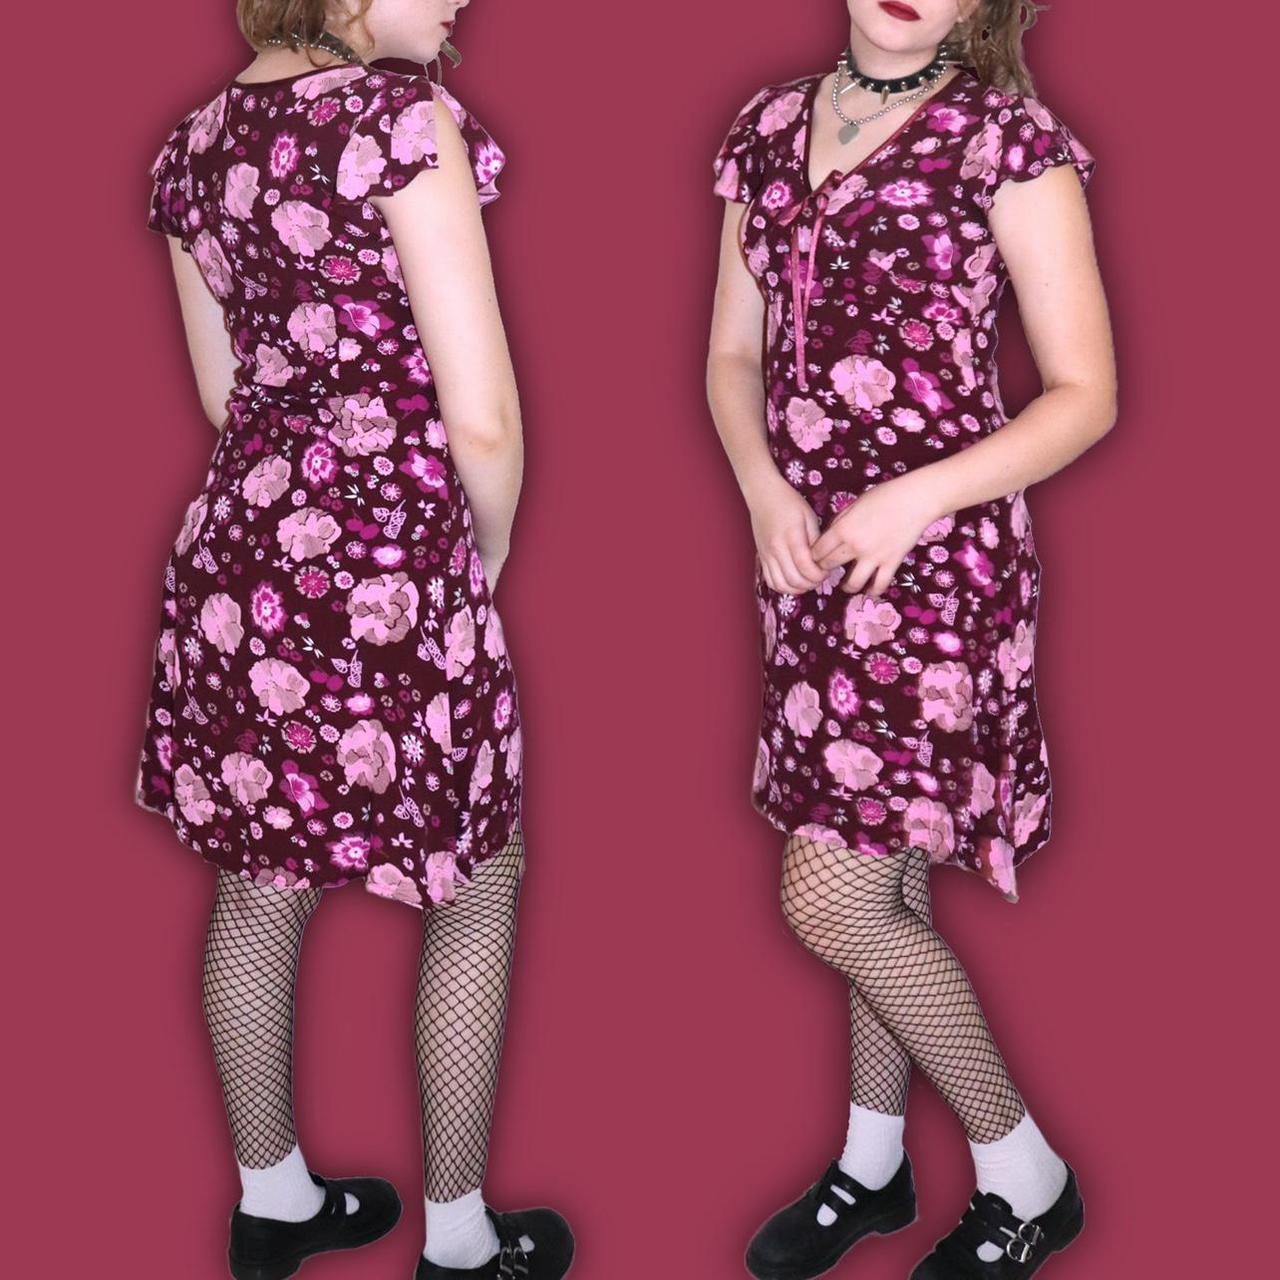 Product Image 3 - 🎀THE ROSIE DRESS🎀
✿ sweet floral